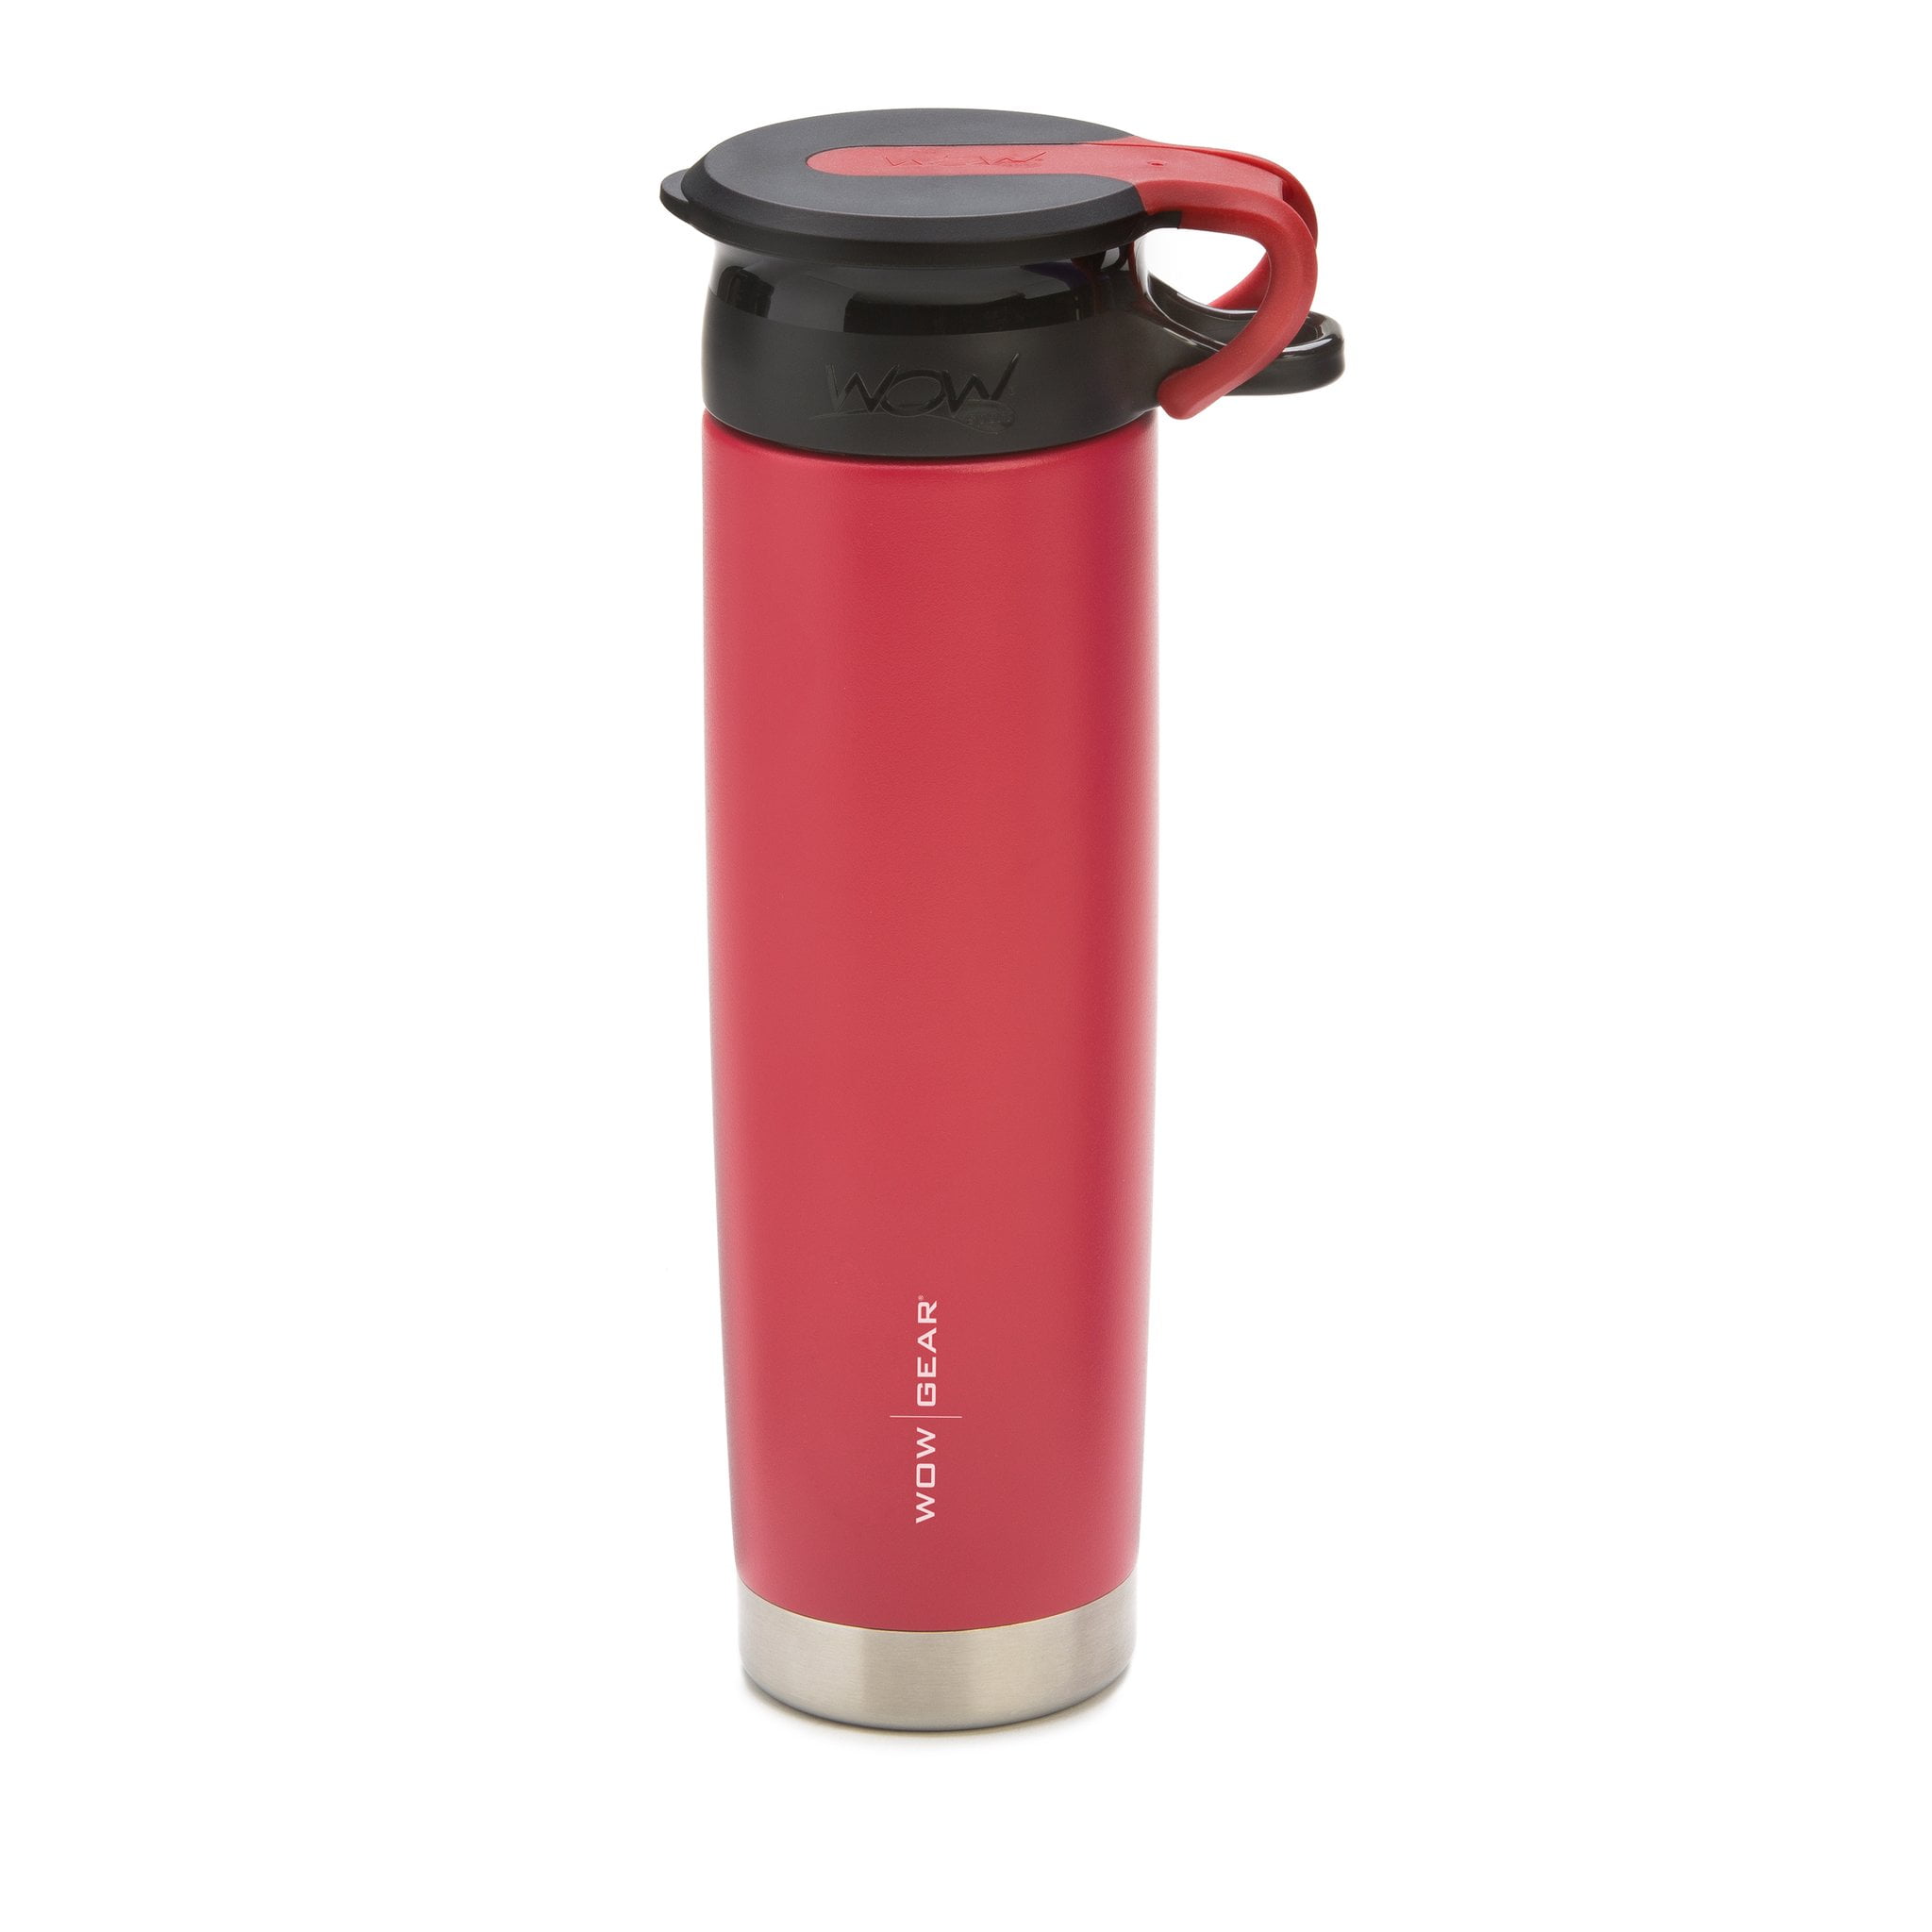 22 Oz. Aluminum Sports Water Bottle w/ Carabiner - AT603 - IdeaStage  Promotional Products